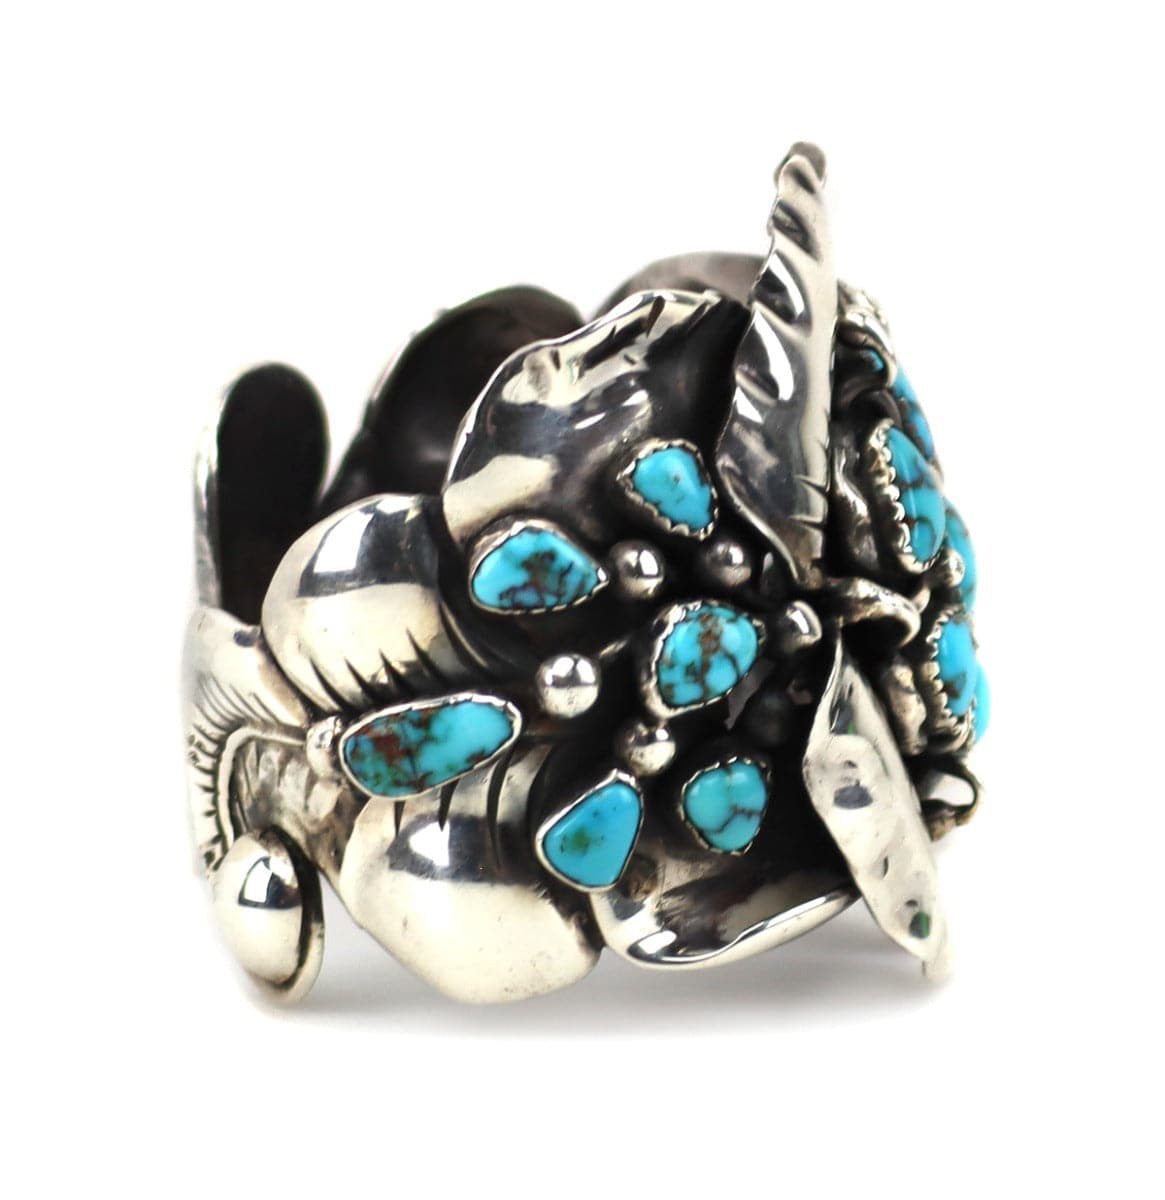 Frank Patania Sr. (1899-1964) and Thunderbird Shop - Burnham Turquoise and Sterling Silver Cuff Bracelet with Floral Design c. 1940-50s, size 6.25 (J91699-0322-004) 1